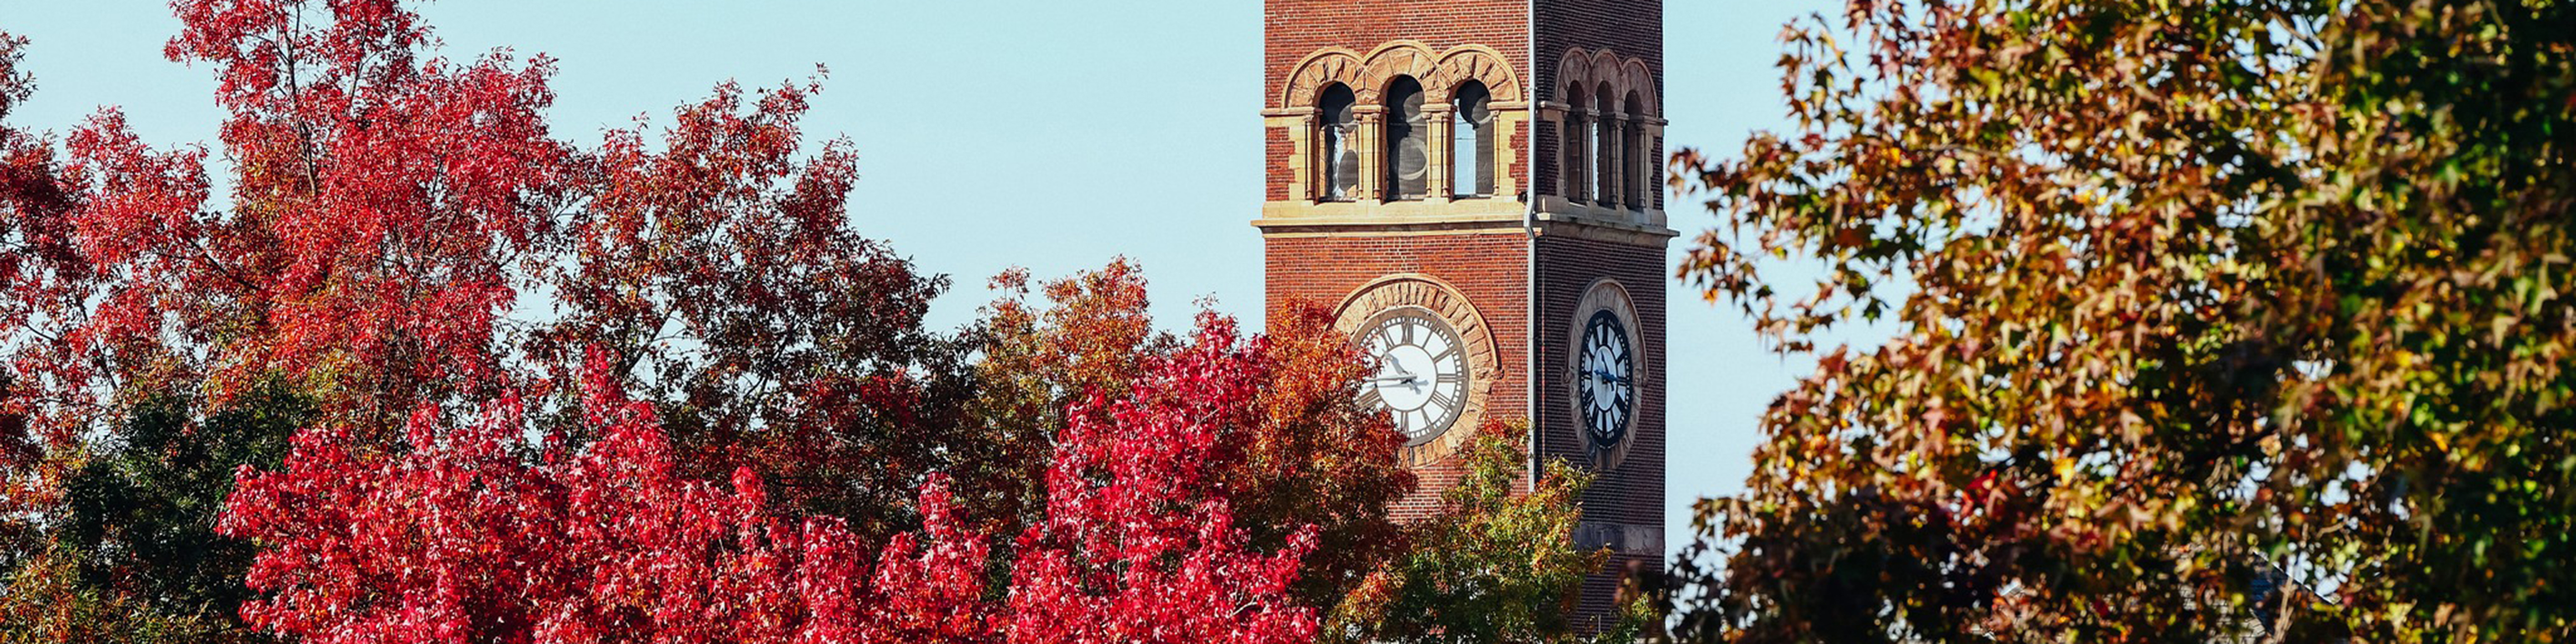 Photo of a campus clock tower behind trees with autumnal foliage